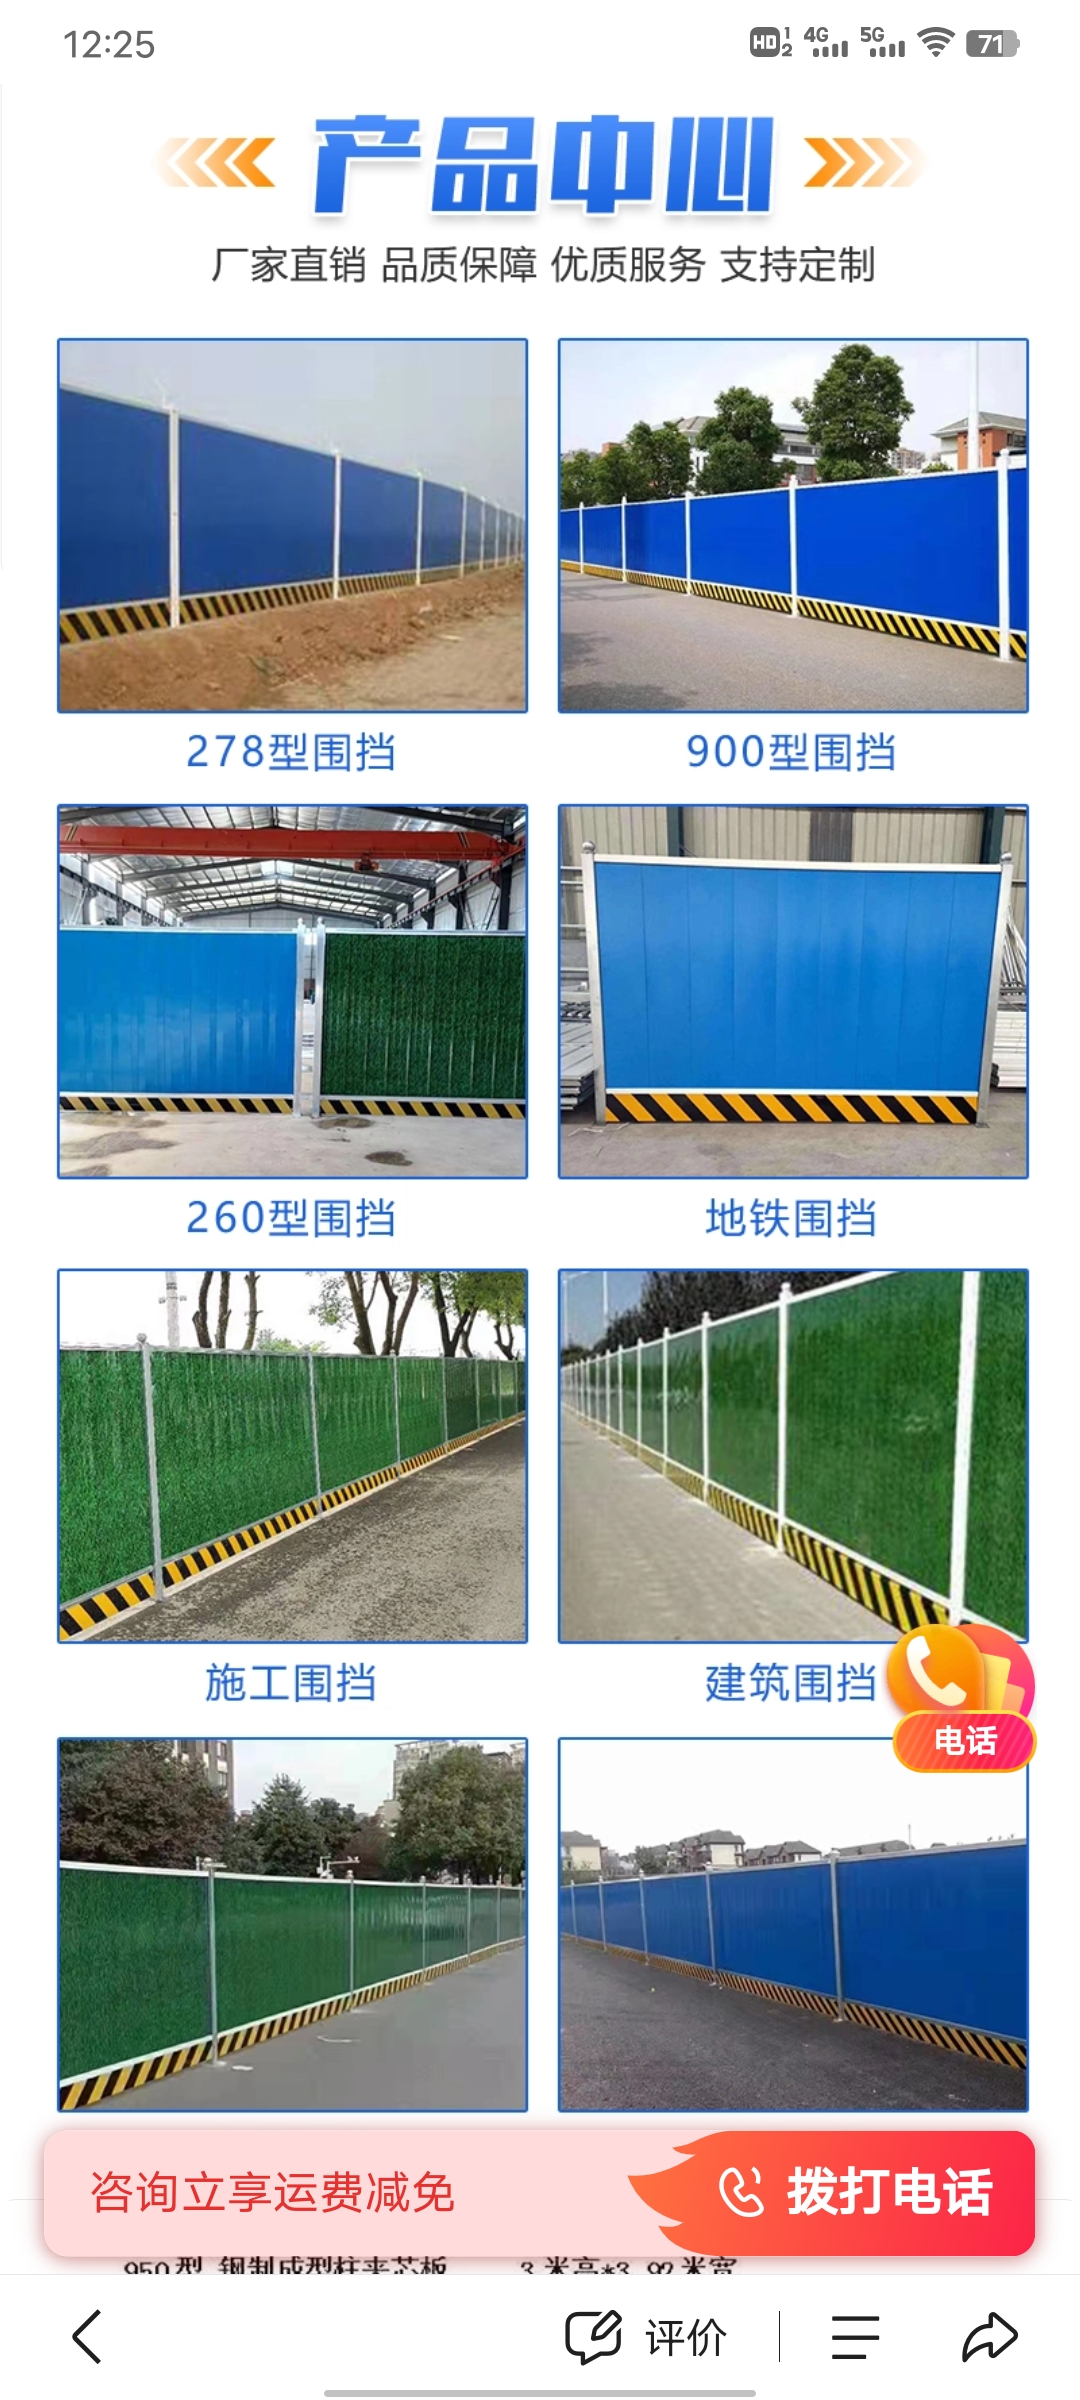 New type of steel structure fence with prefabricated enclosure construction site protective fence available in stock for customization